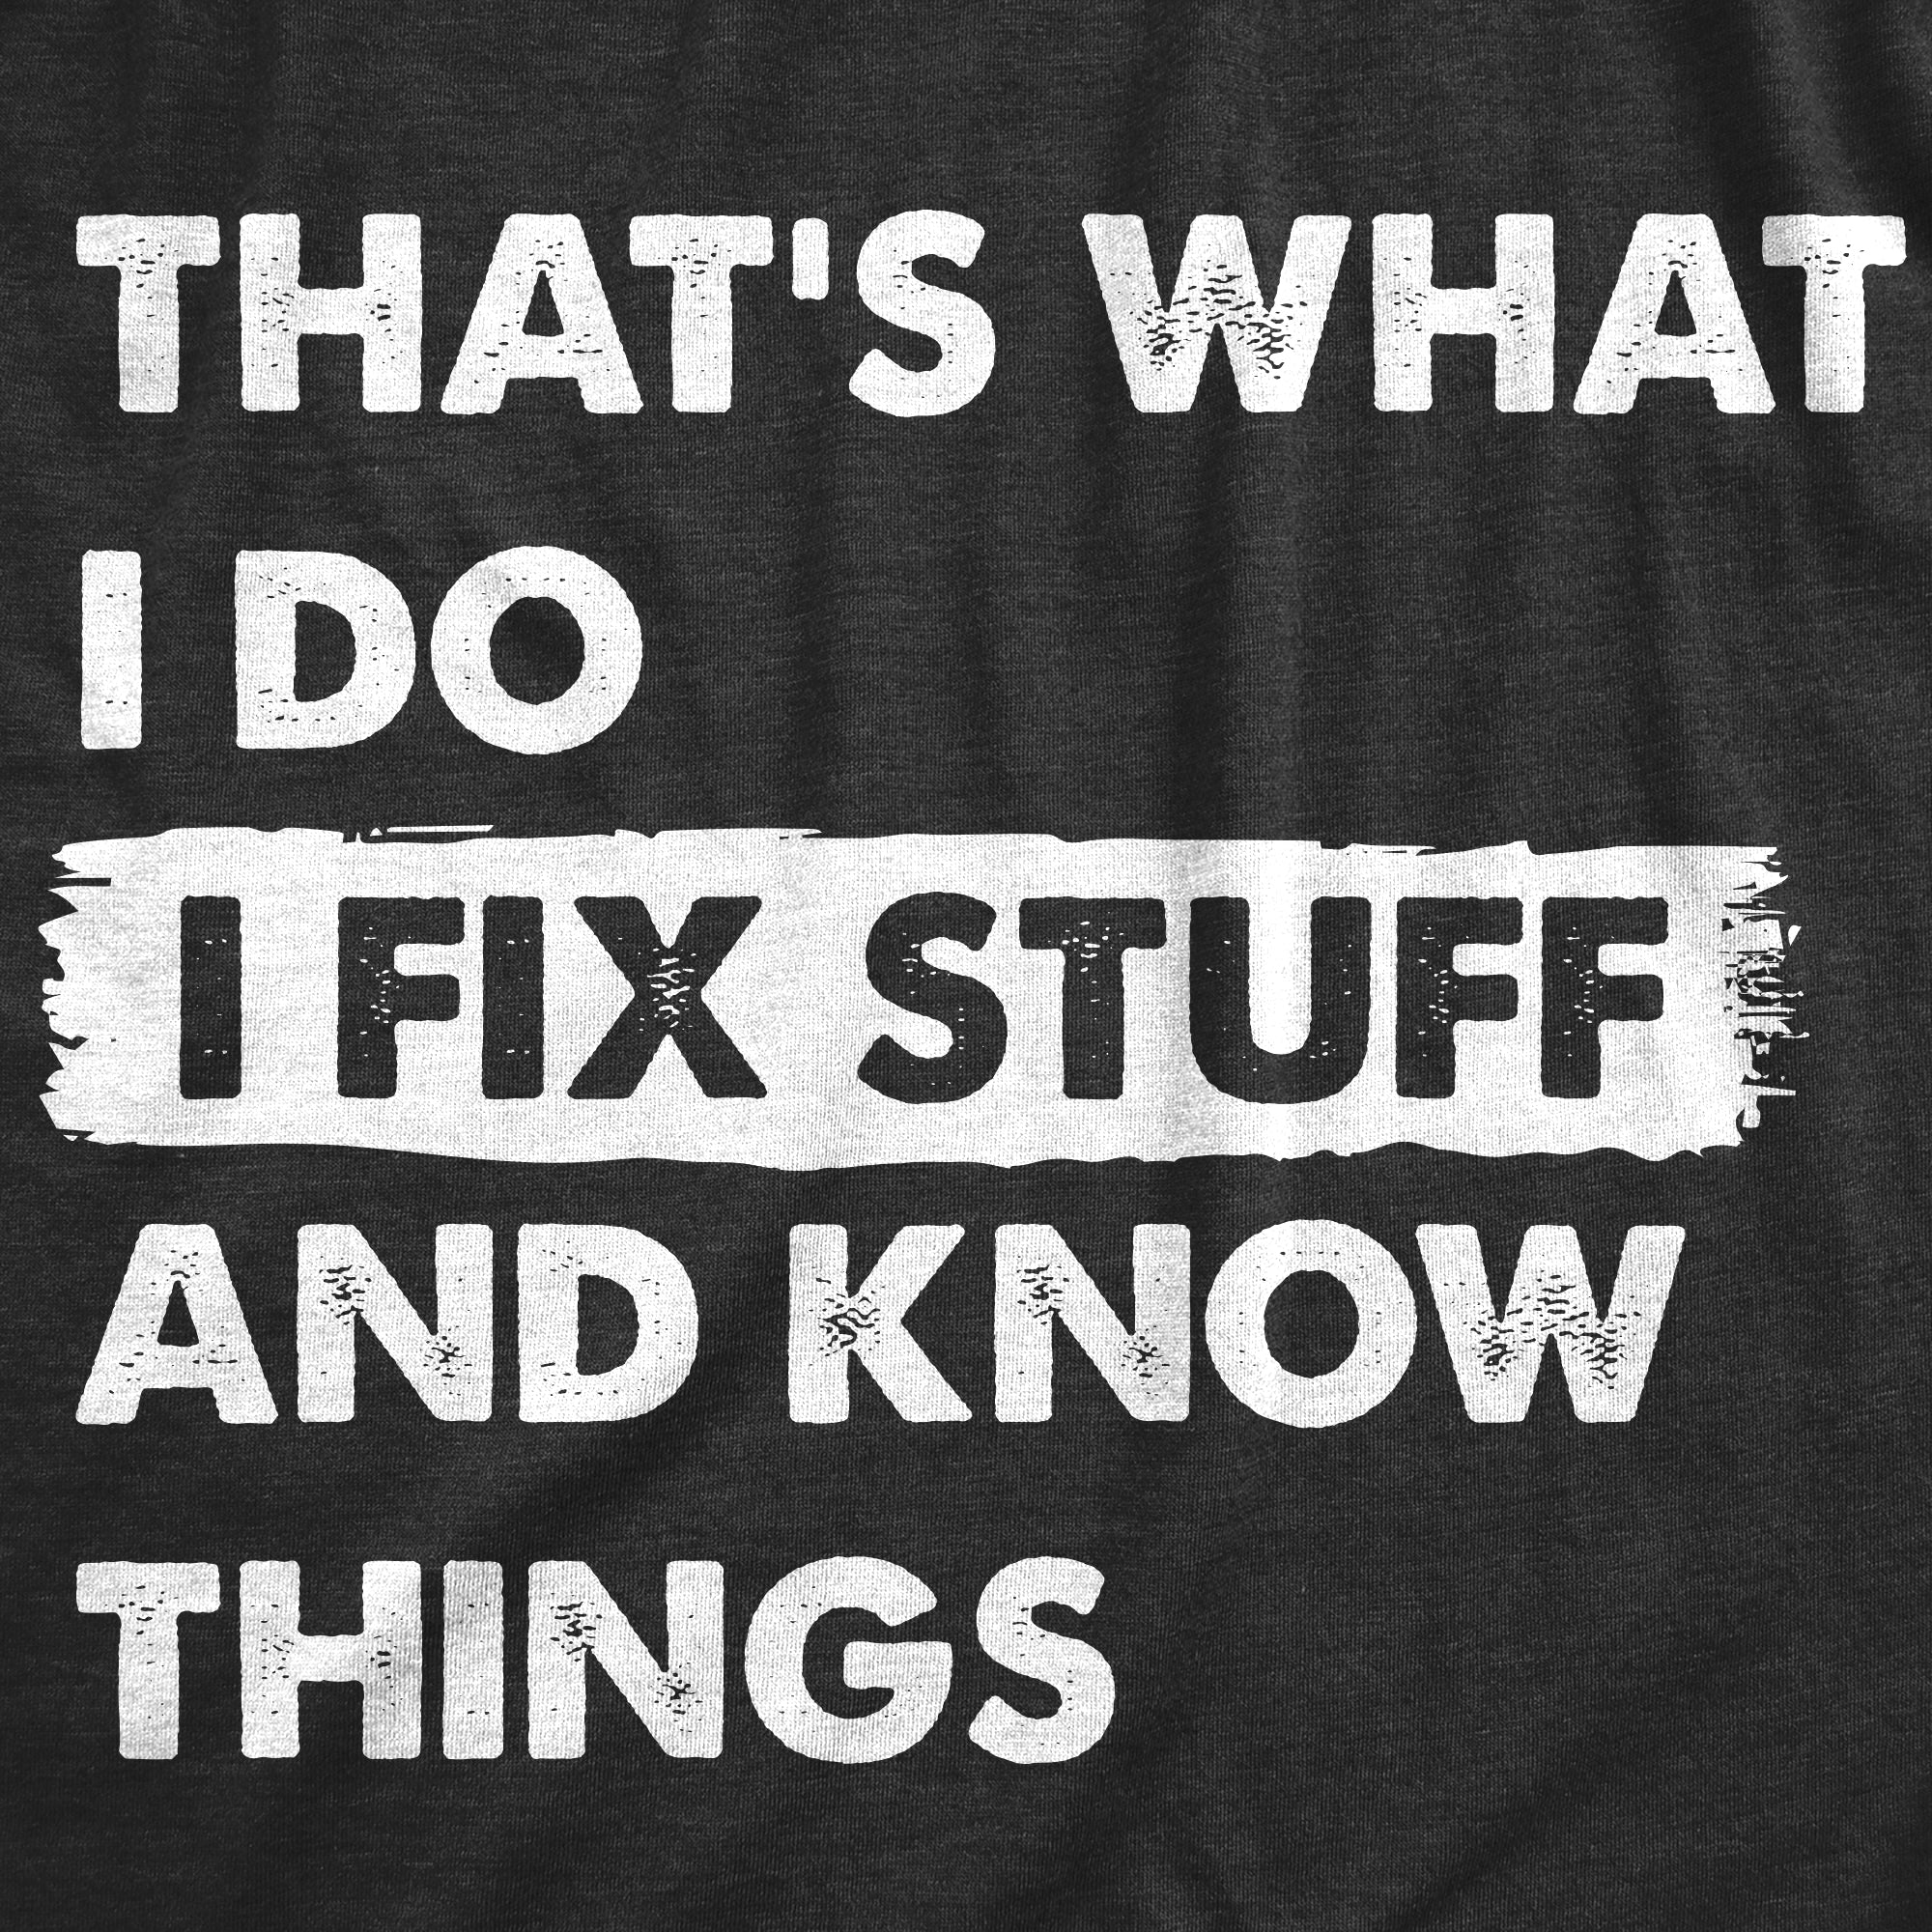 Funny Heather Black - WHATIDO Thats What I Do I Fix Stuff And Know Things Mens T Shirt Nerdy Sarcastic Tee